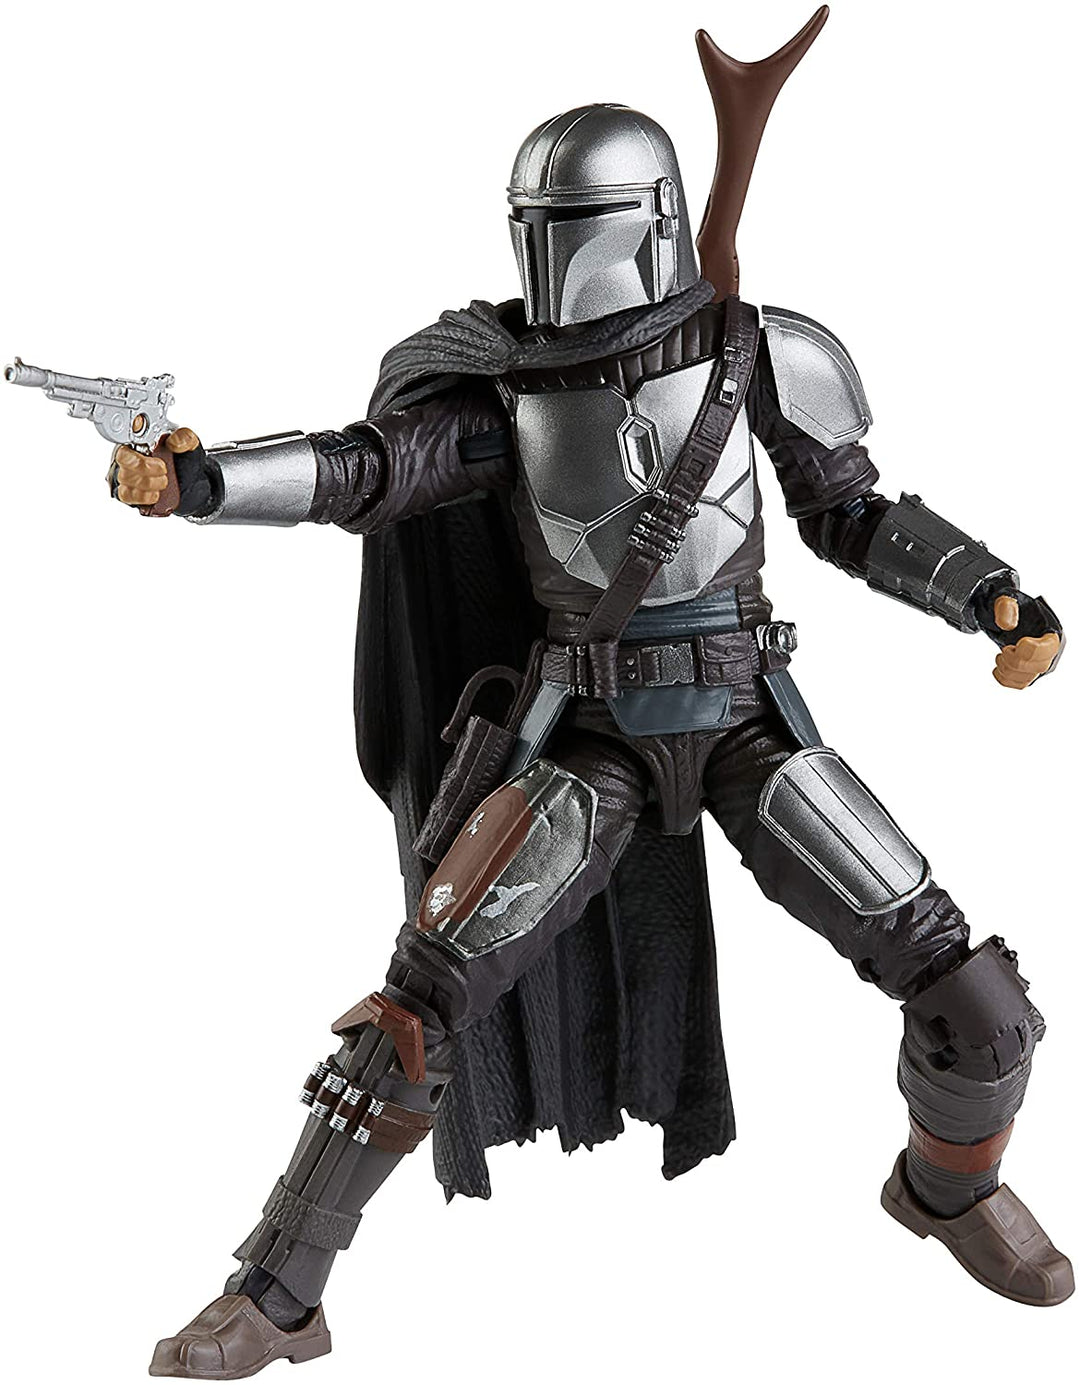 Star Wars The Black Series The Mandalorian Toy 6-Inch-Scale Collectible Action Figure, Toys For Kids Ages 4 and Up